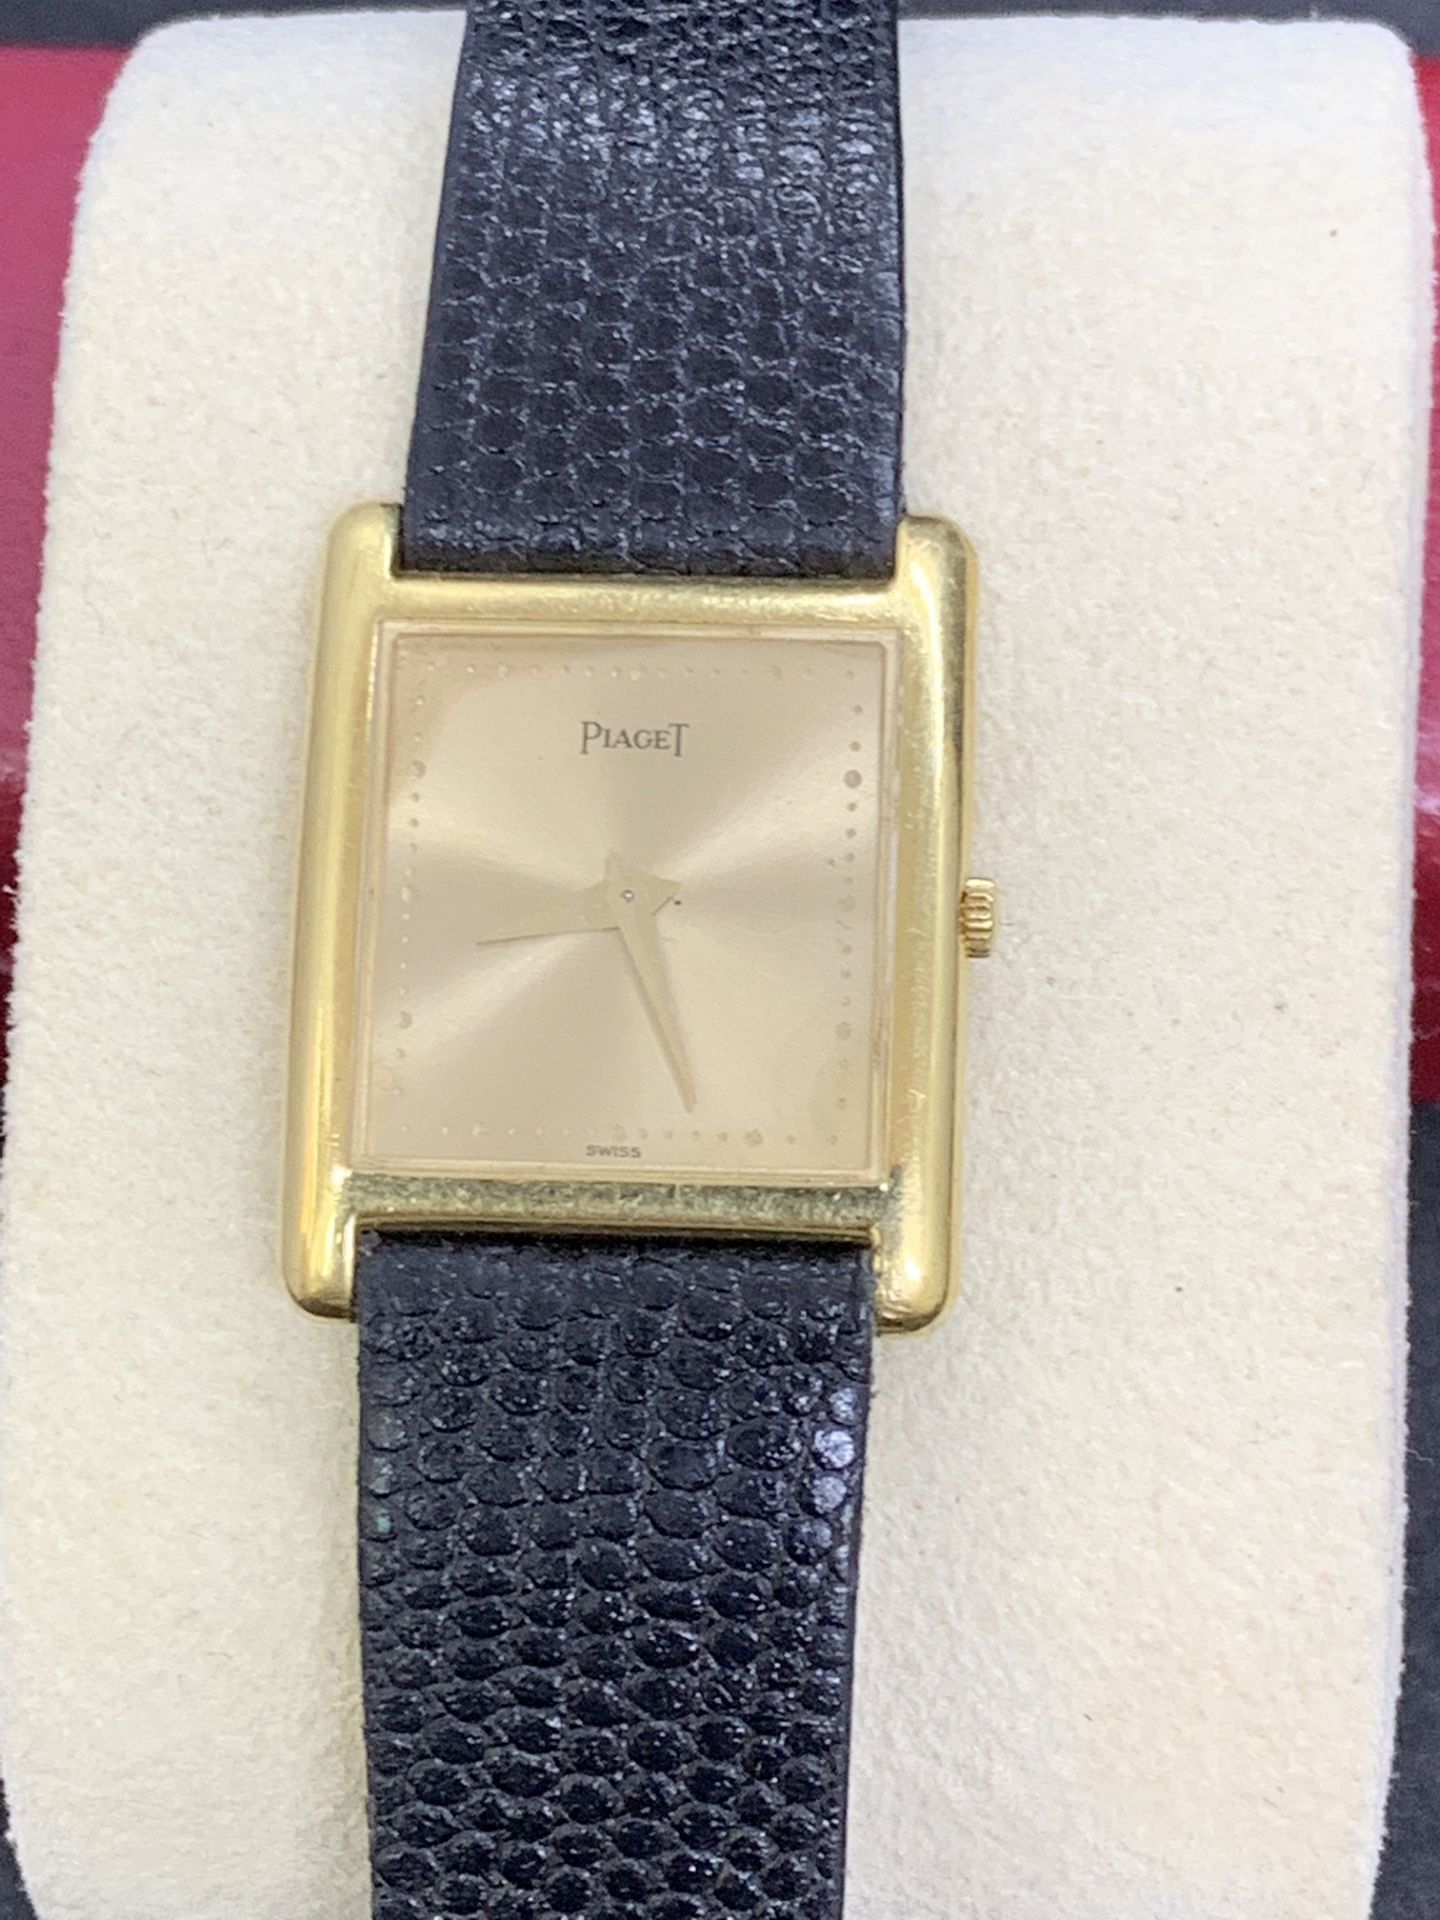 PIAGET 18ct GOLD WATCH - Image 3 of 6